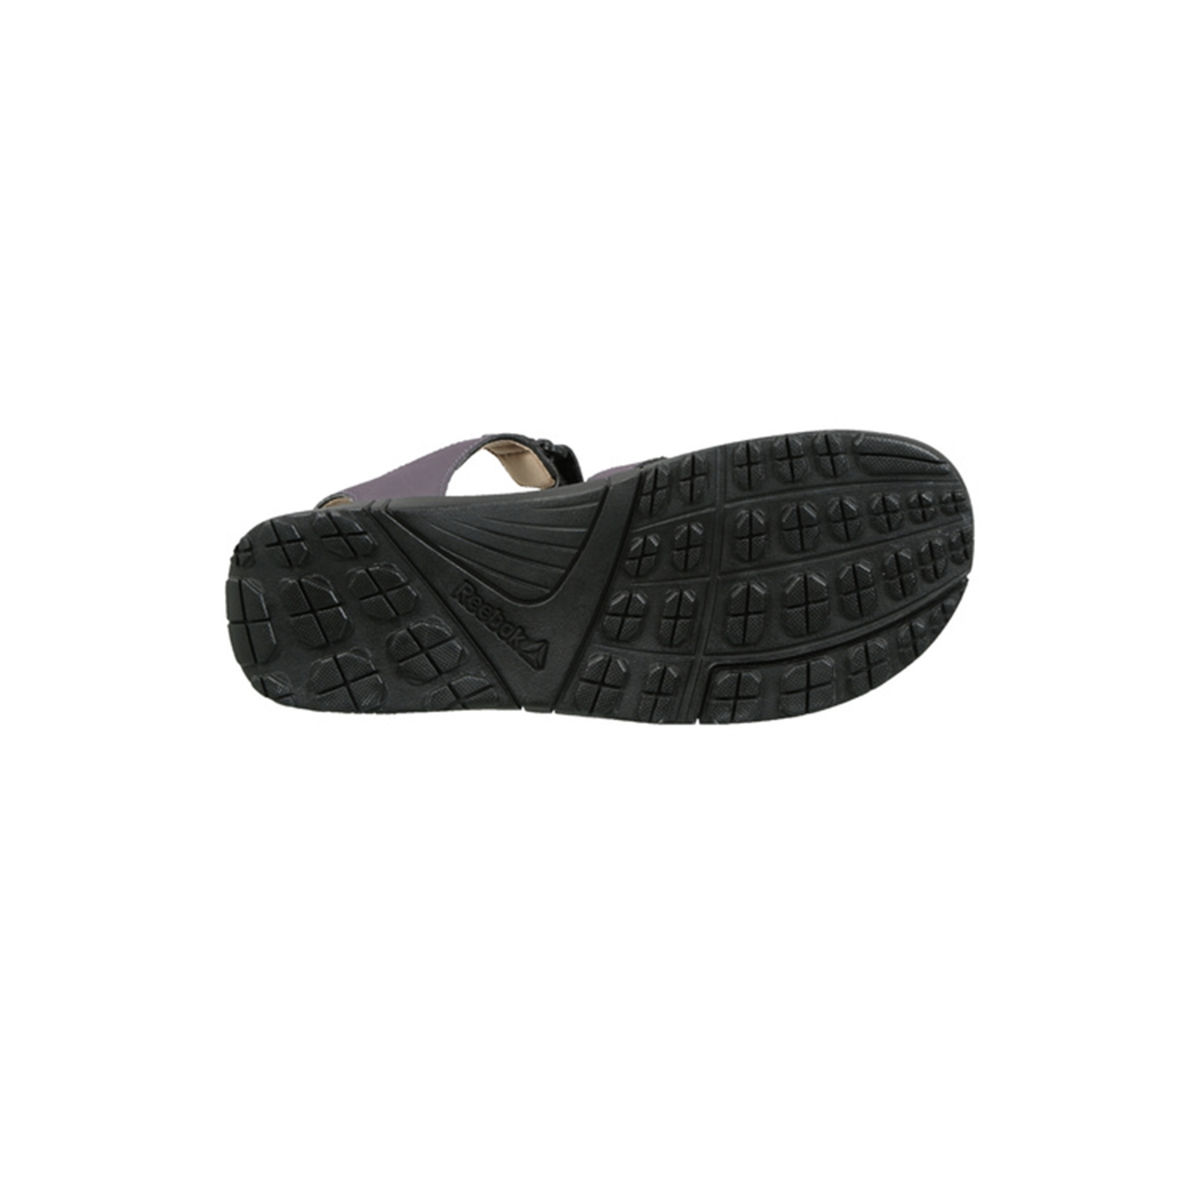 Beach Sandals Shoes Comfort Sports Sandals (3.20-1) - China Sandal Shoes  and Shoes price | Made-in-China.com